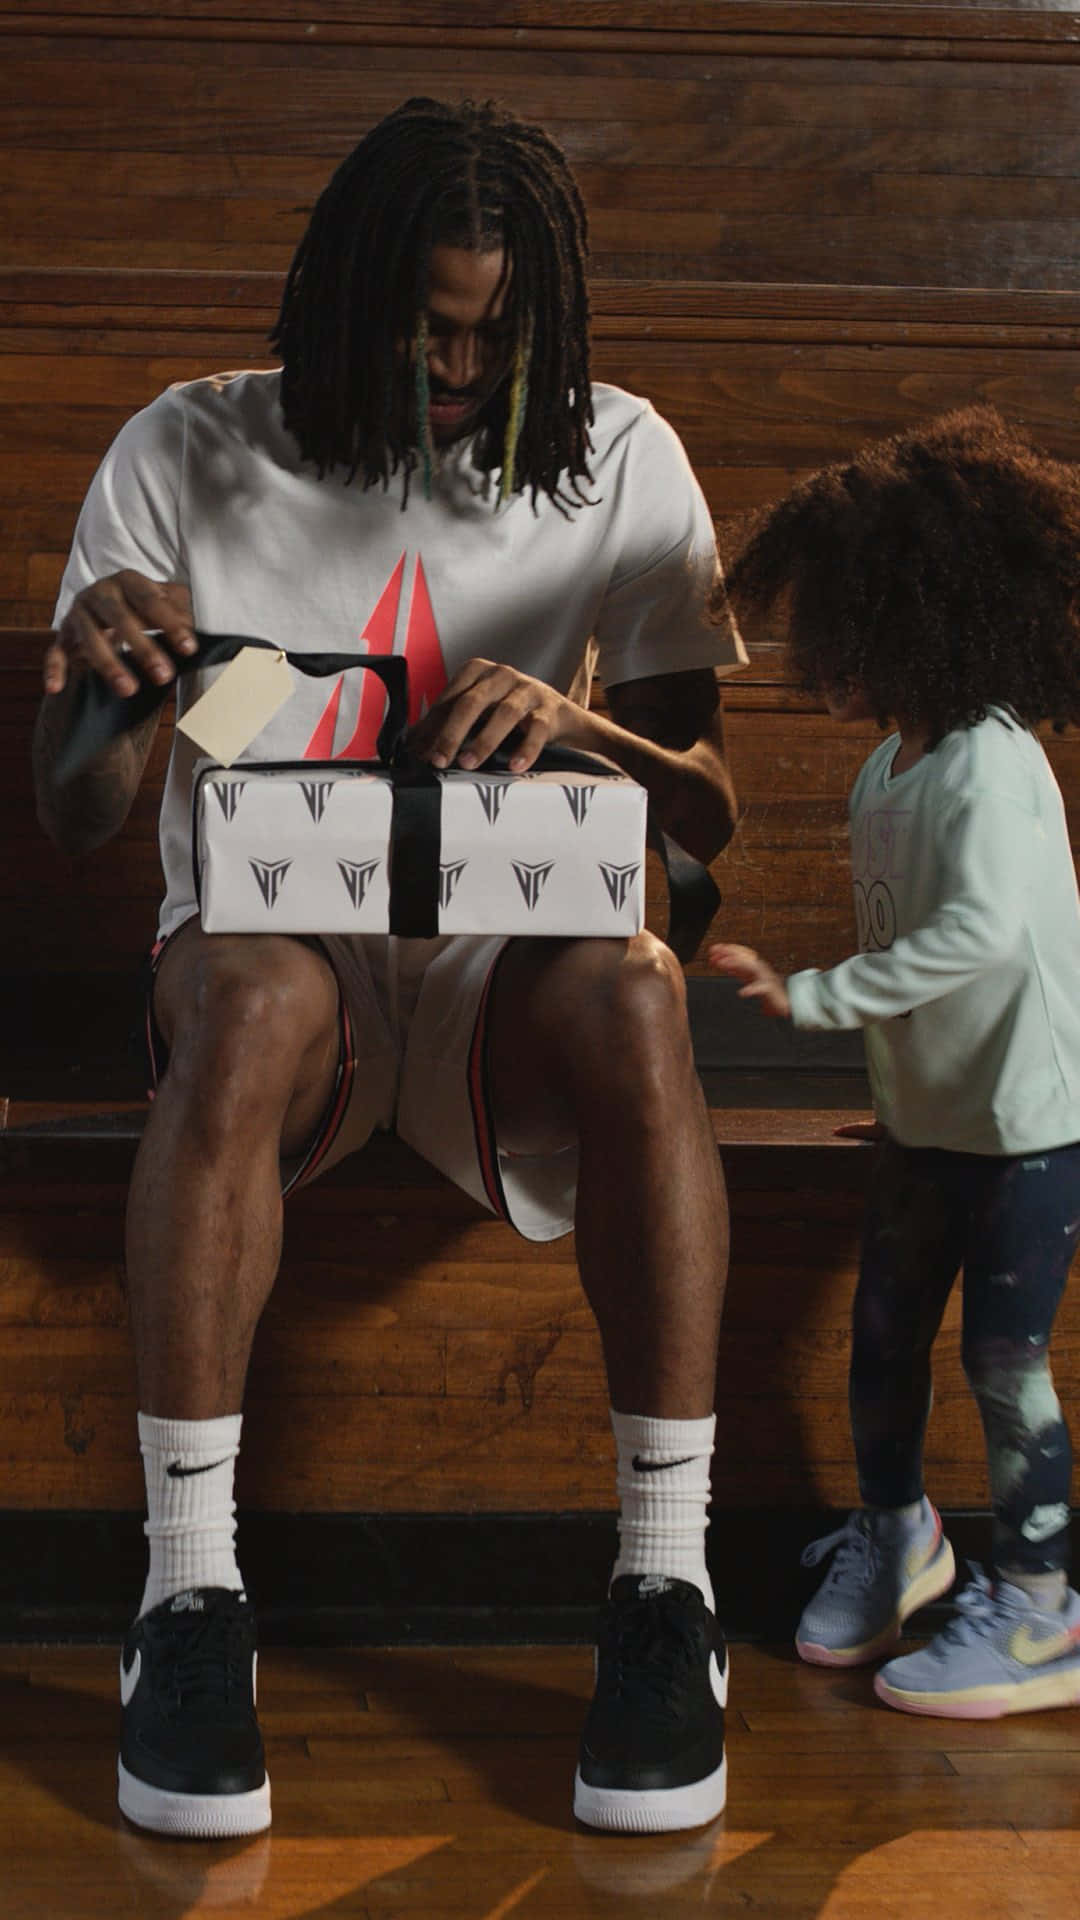 Ja Morrant Unboxing A Package With His Daughter Wallpaper